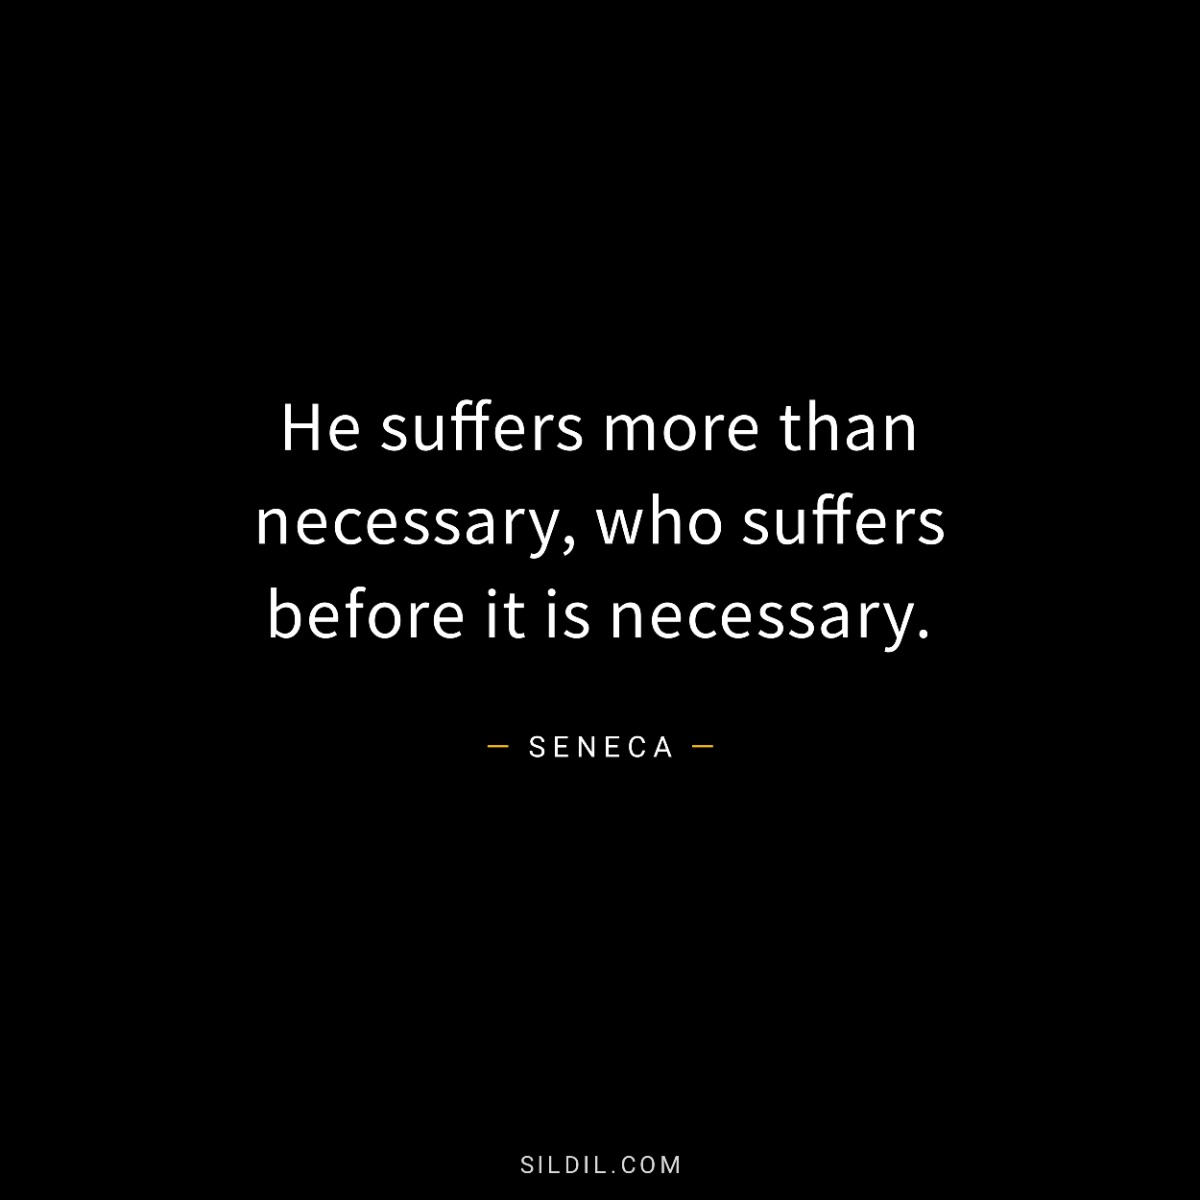 He suffers more than necessary, who suffers before it is necessary.